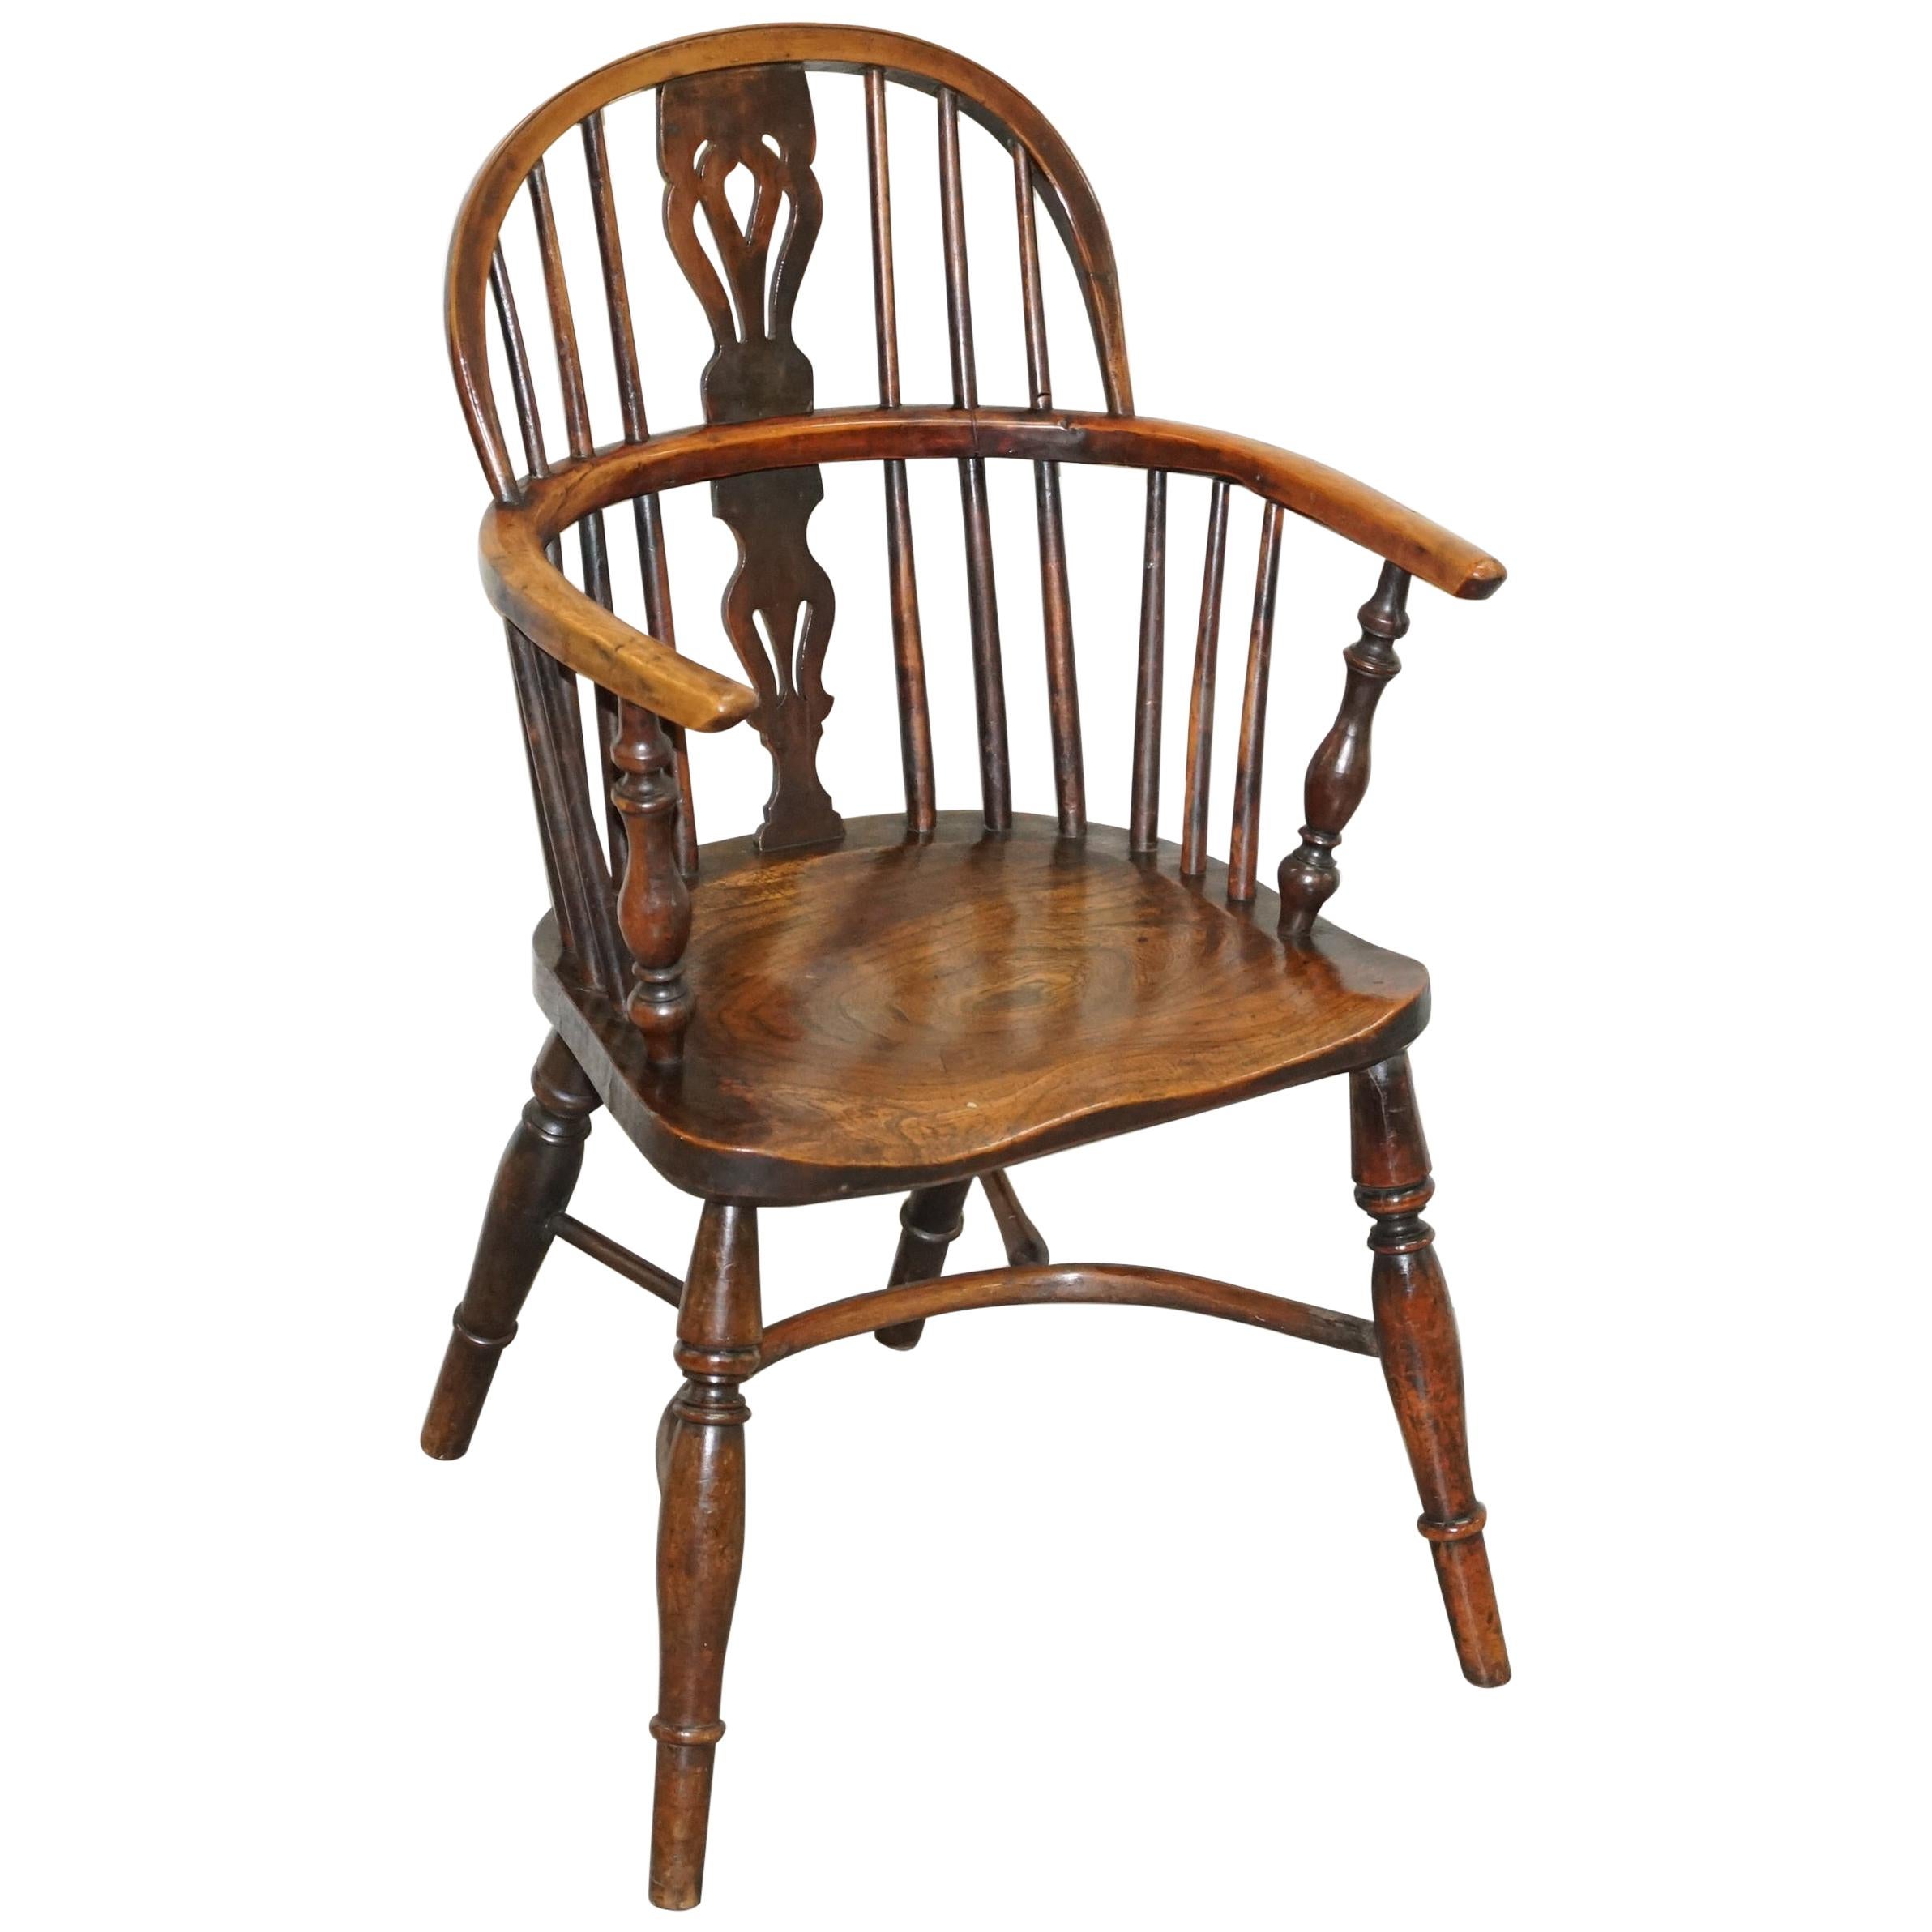 1 of 6 Solid Elm Windsor Armchairs circa 1860 English Countryhouse Furniture For Sale